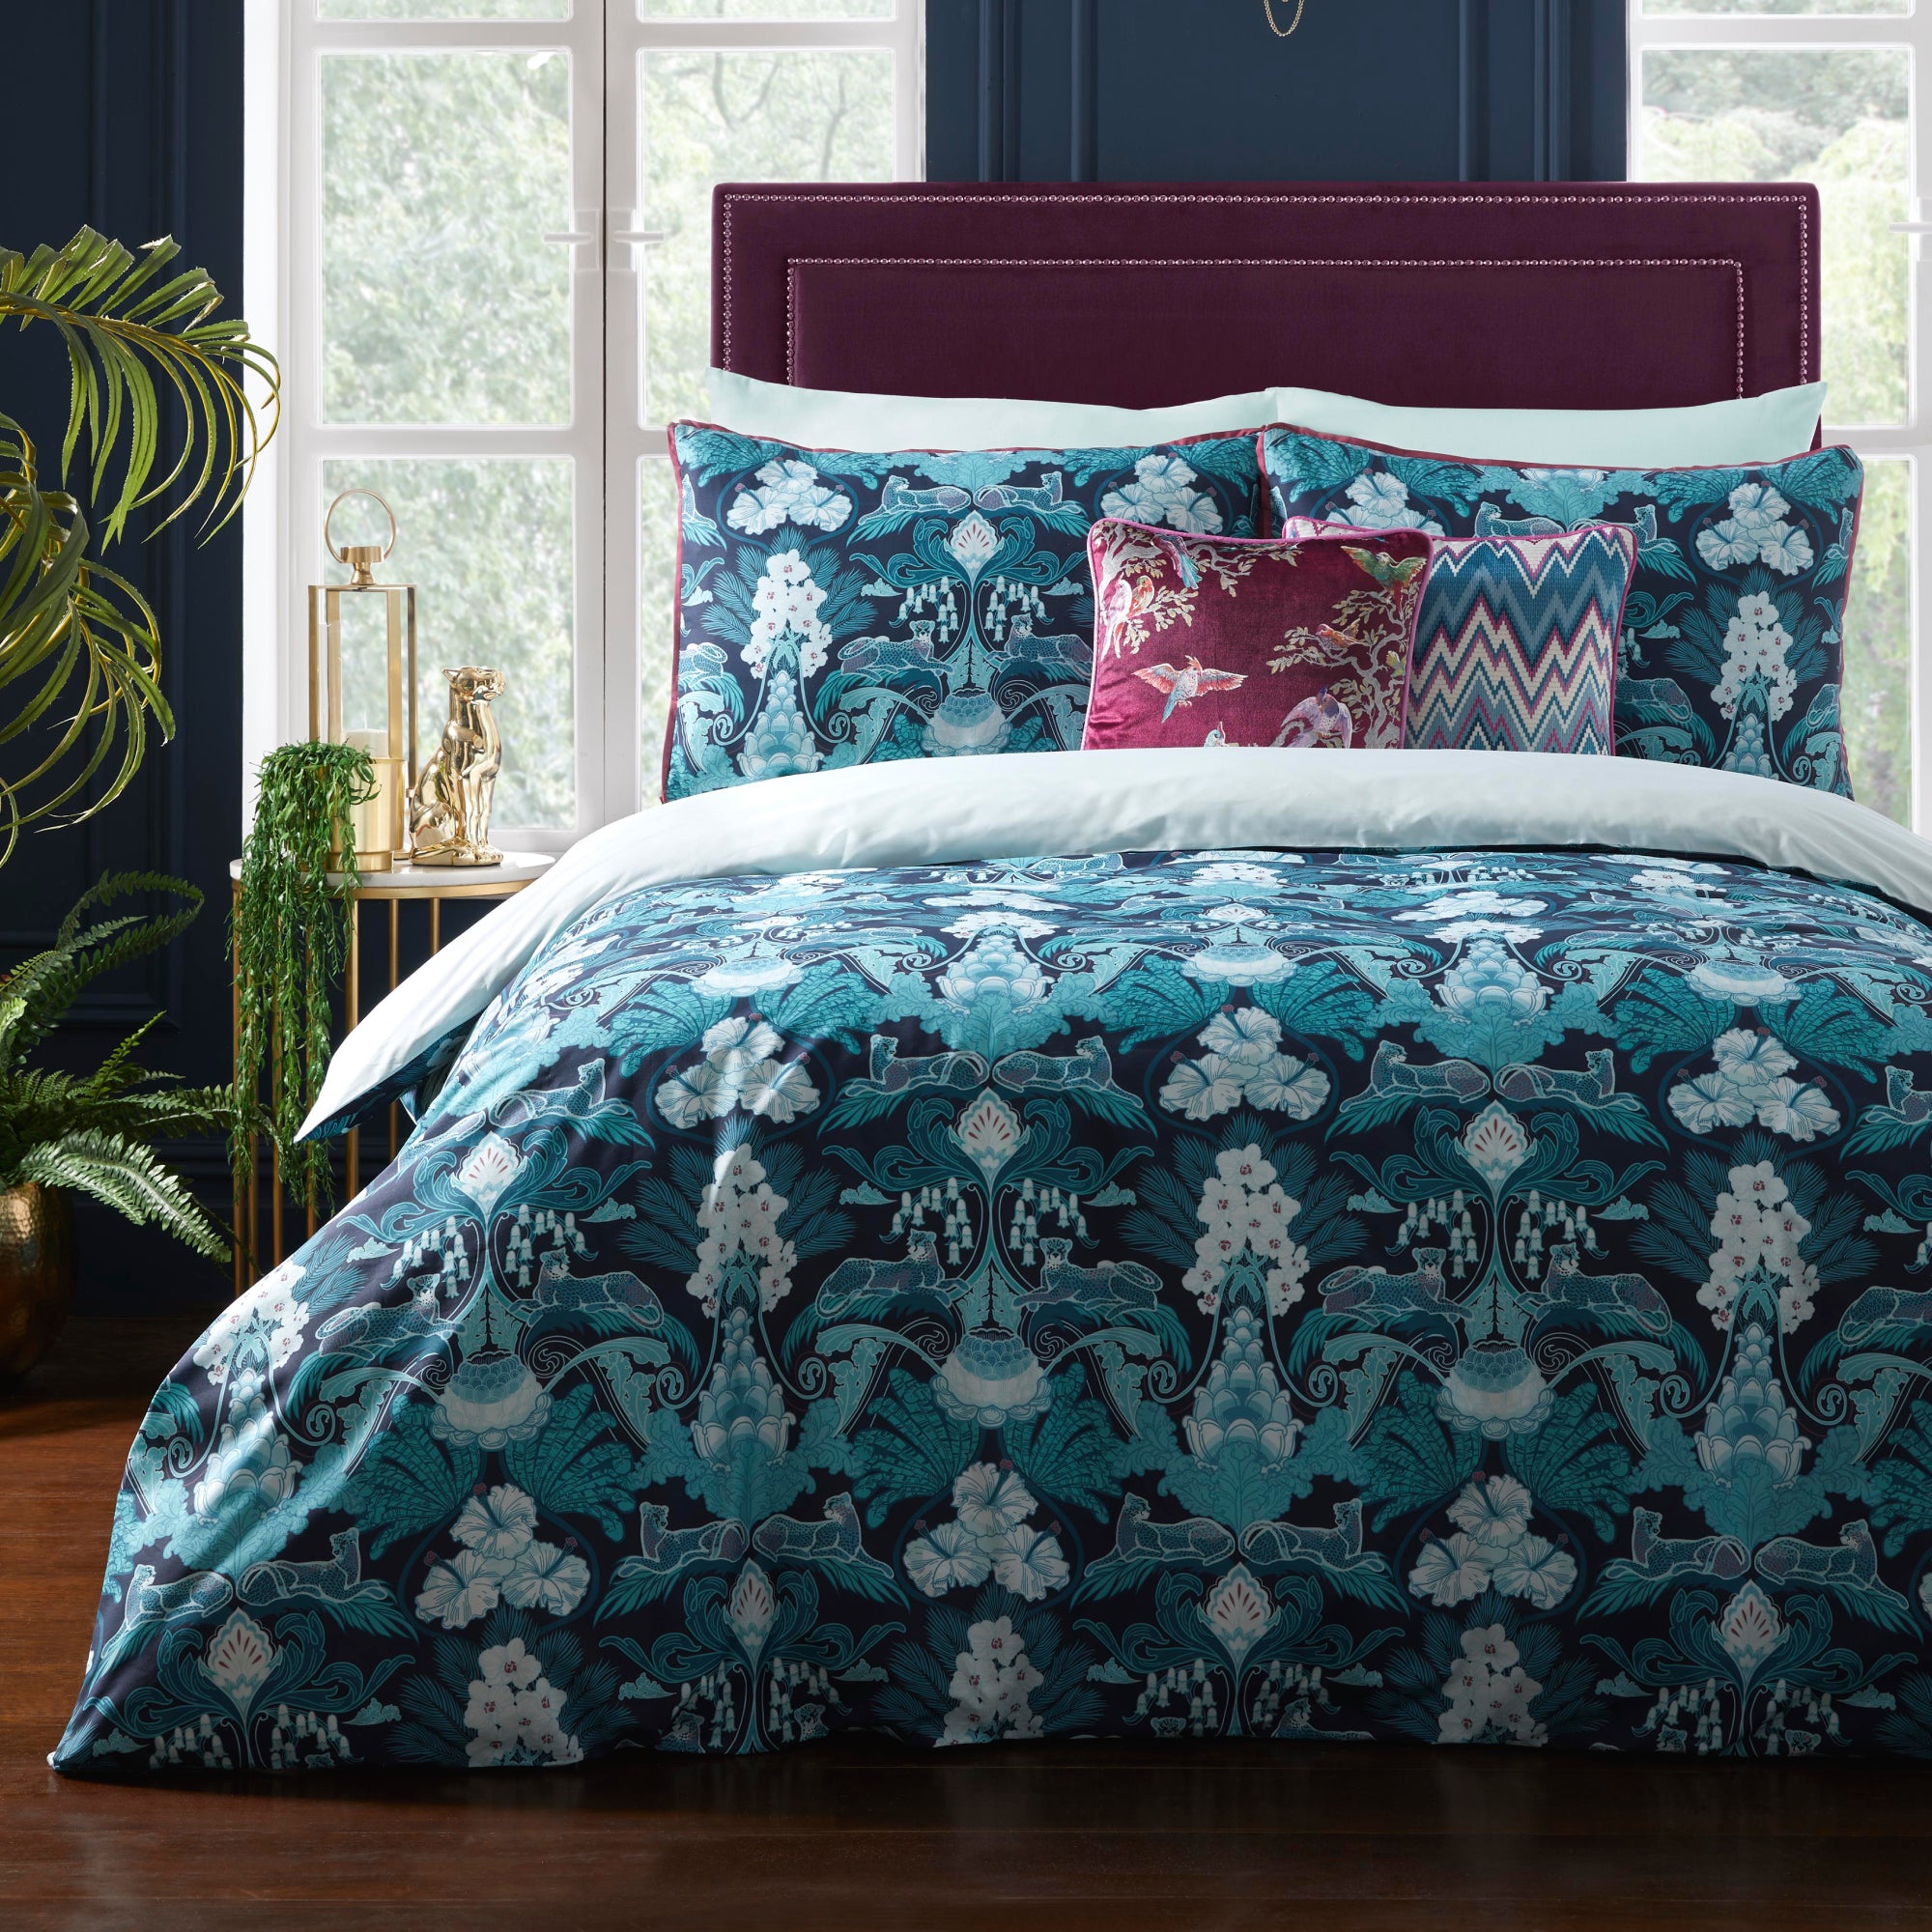 Duvet Cover Set Suburban Jungle by Laurence Llewelyn-Bowen in Navy